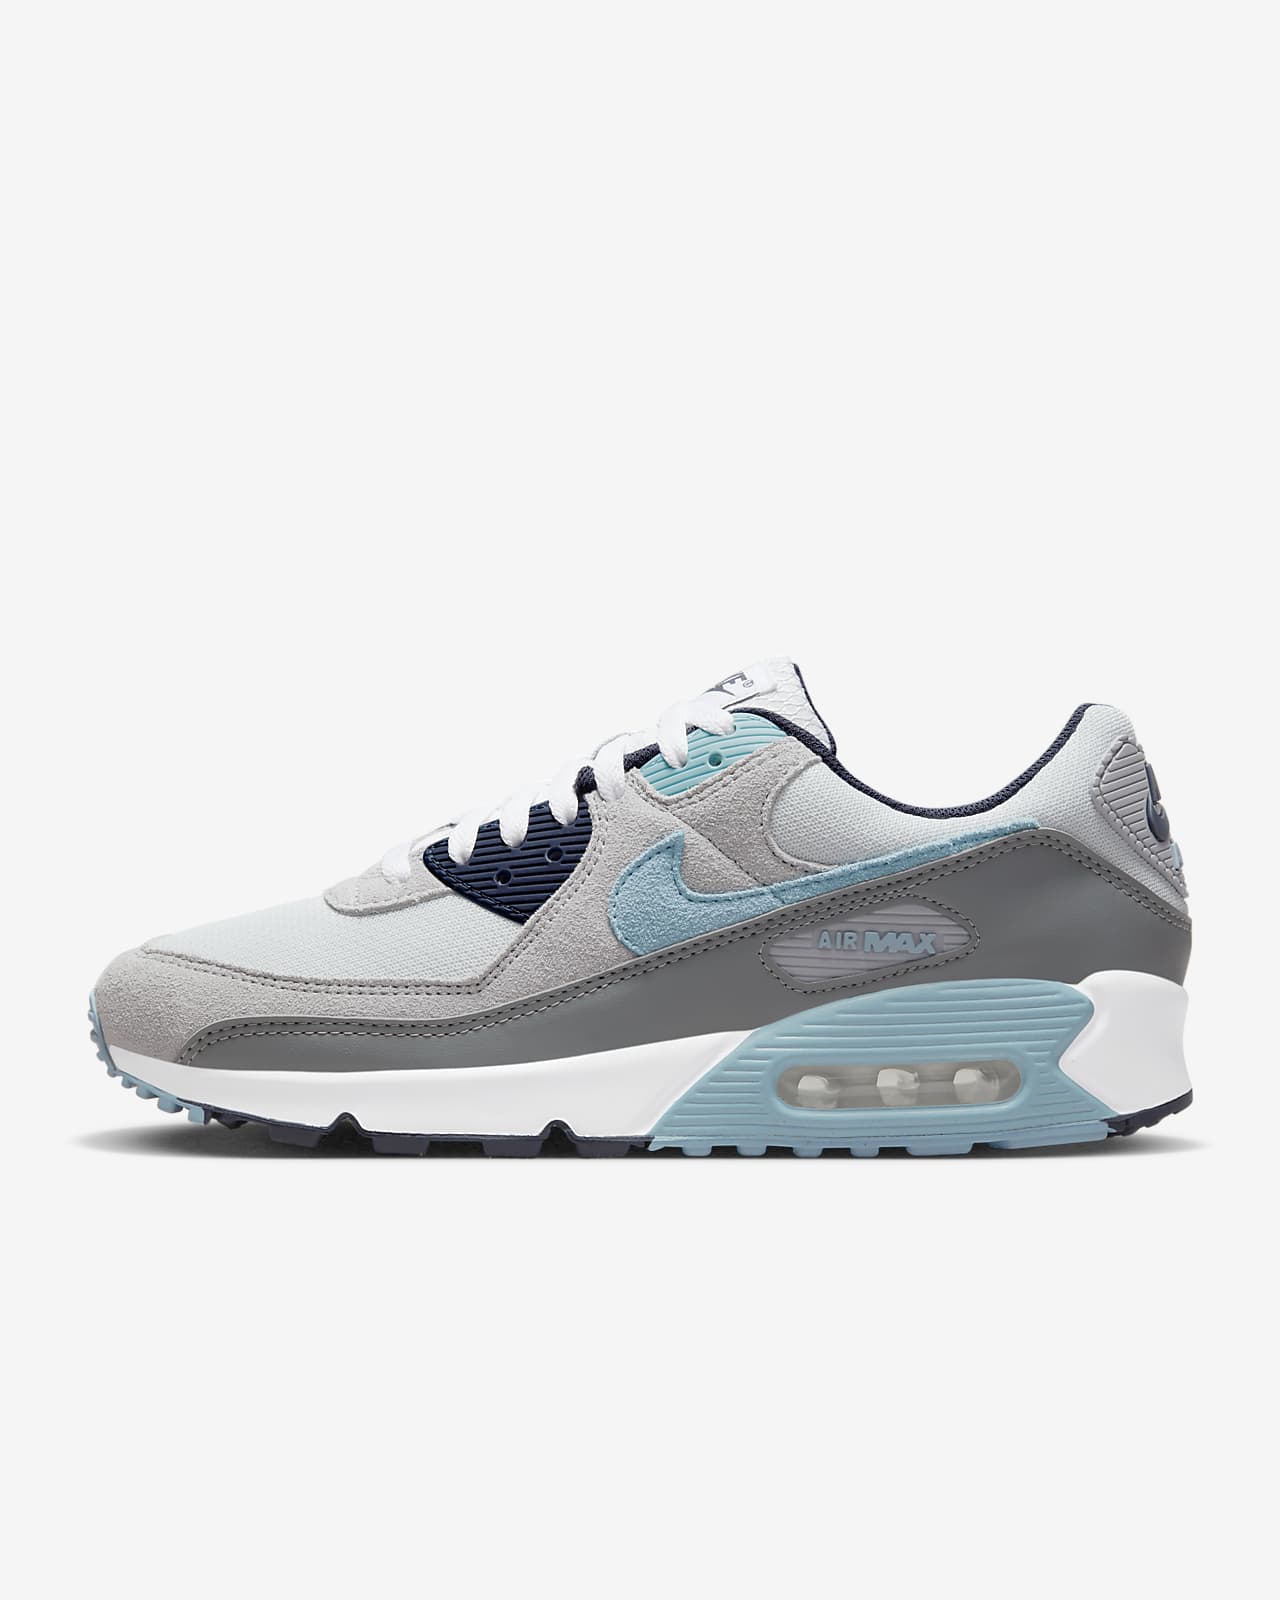 home delivery Inaccurate to understand Nike Air Max 90 Men's Shoes. Nike.com